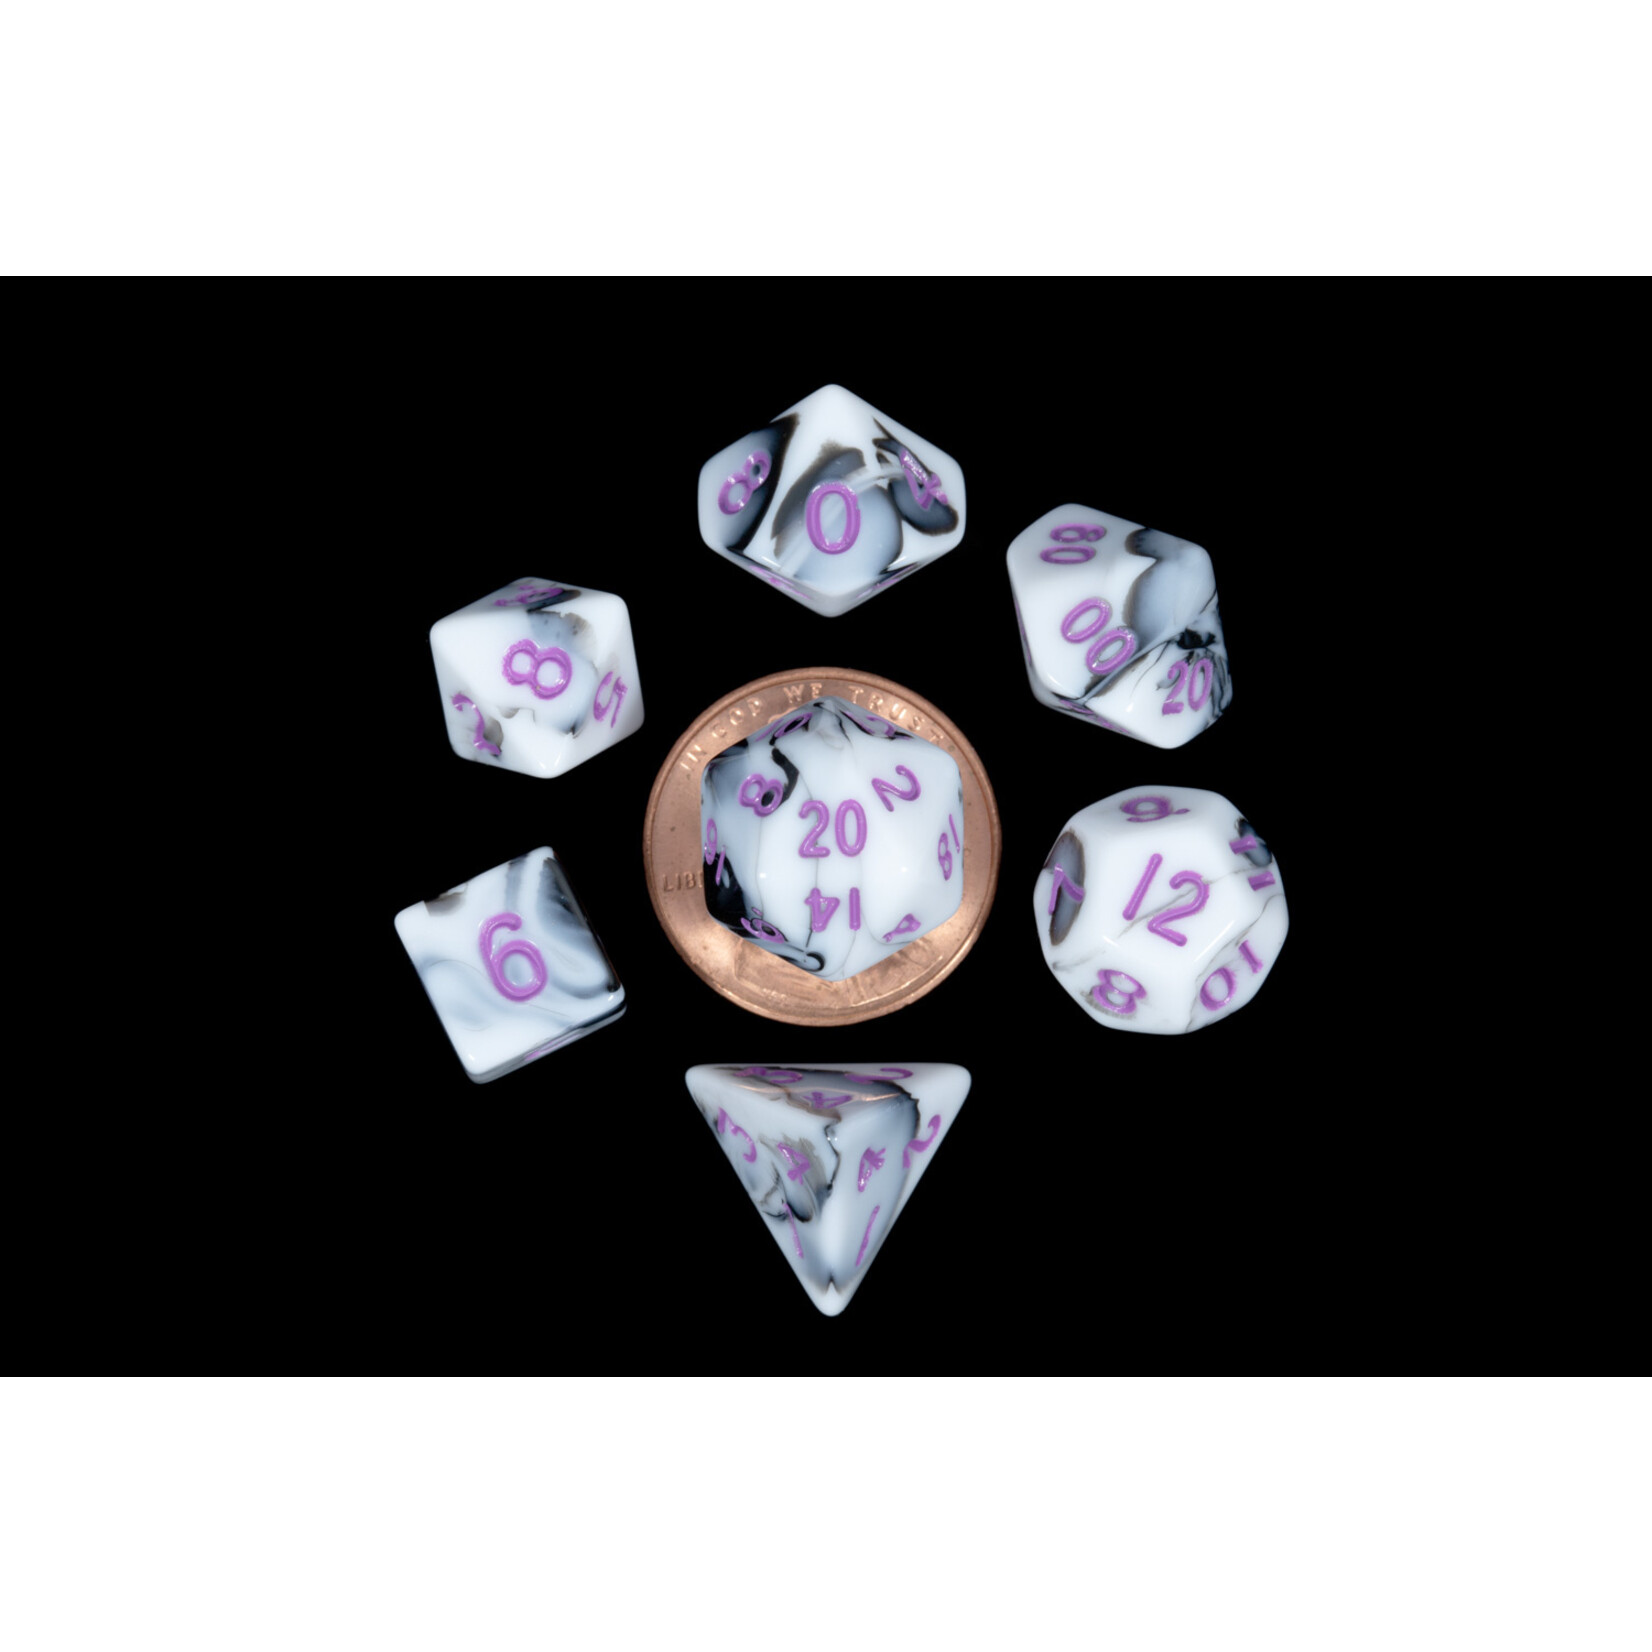 Metallic Dice Games Mini Polyhedral Dice Set: Marble with Purple Numbers